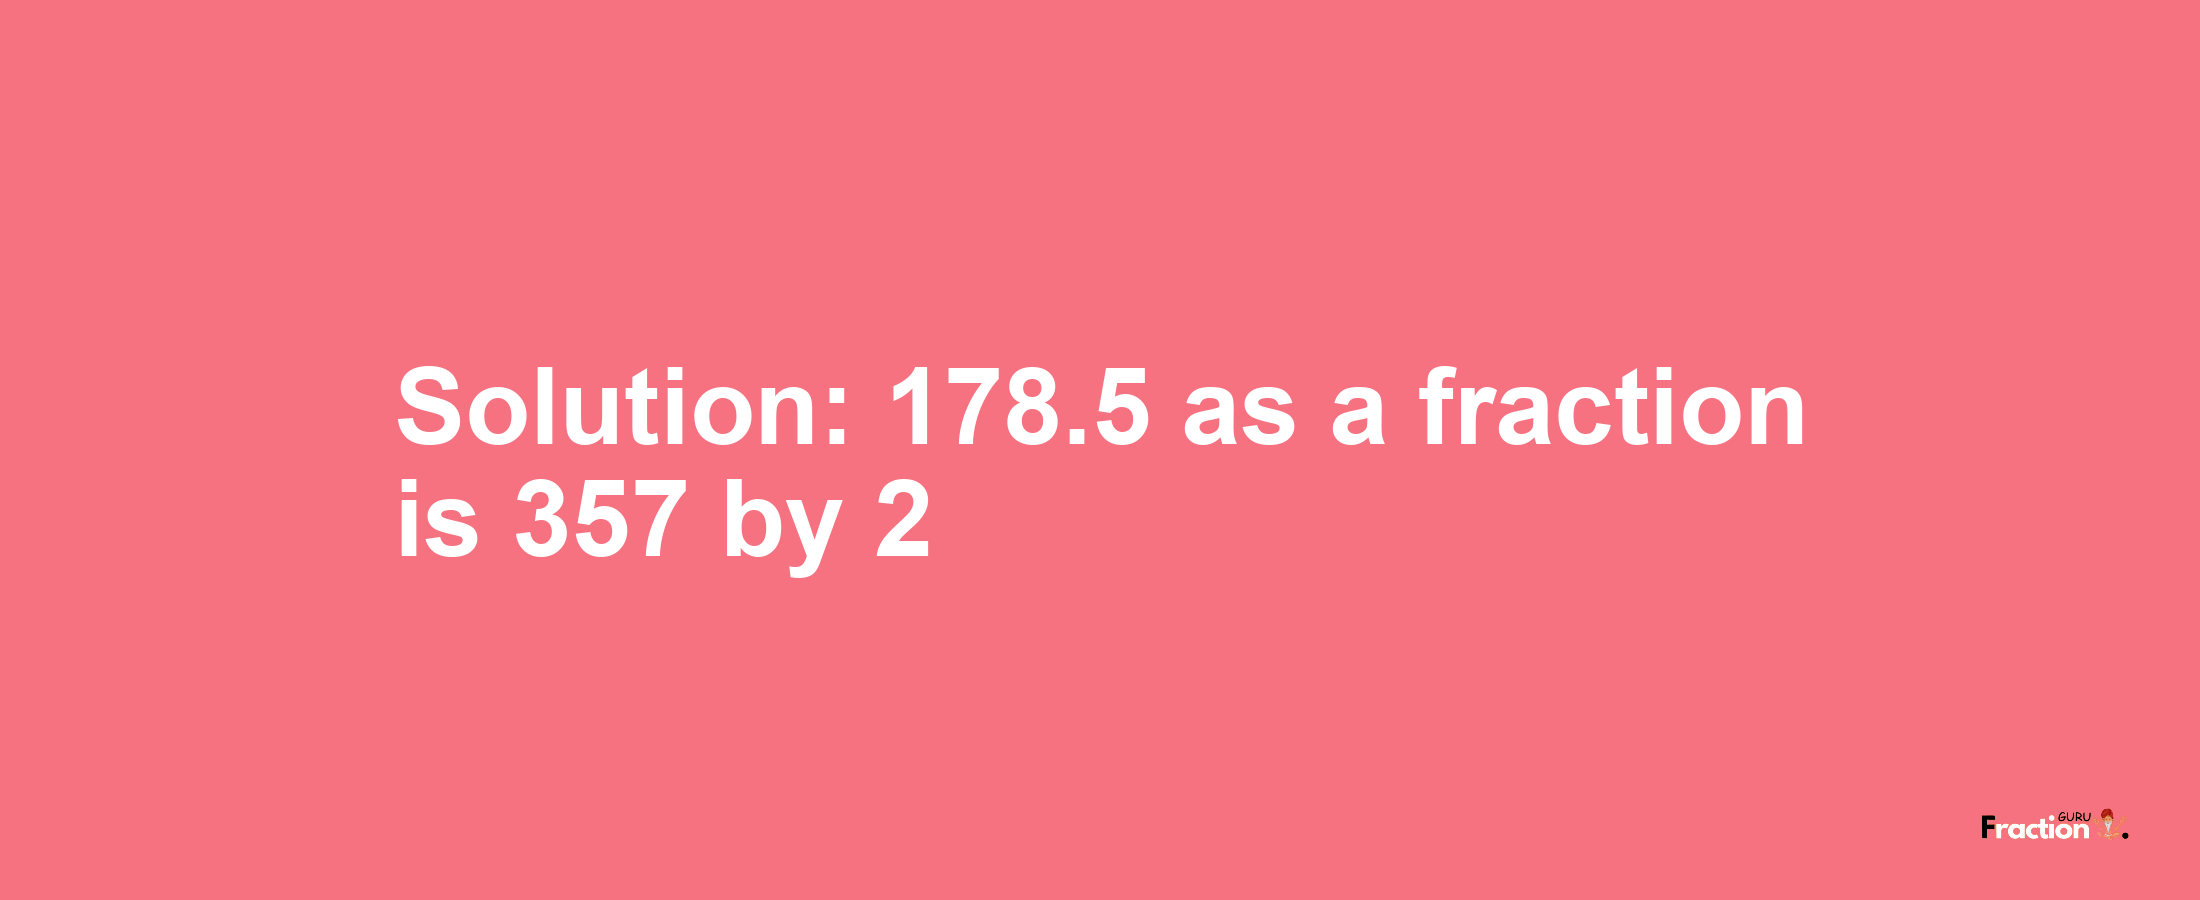 Solution:178.5 as a fraction is 357/2